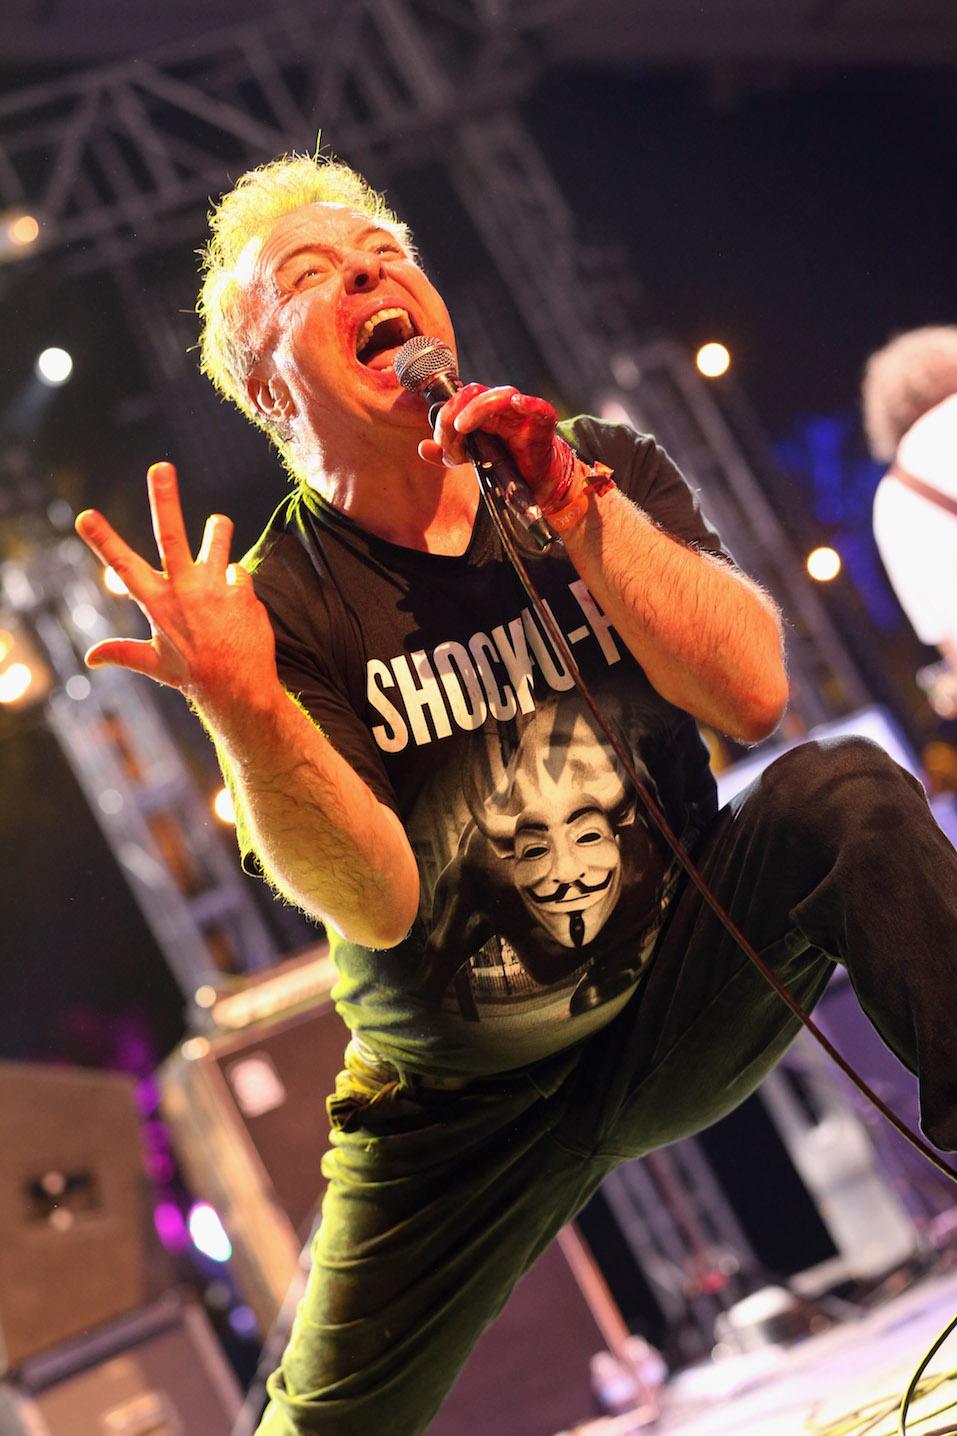 Jello Biafra performs on stage during the 2013 Coachella Valley Music & Arts Festival